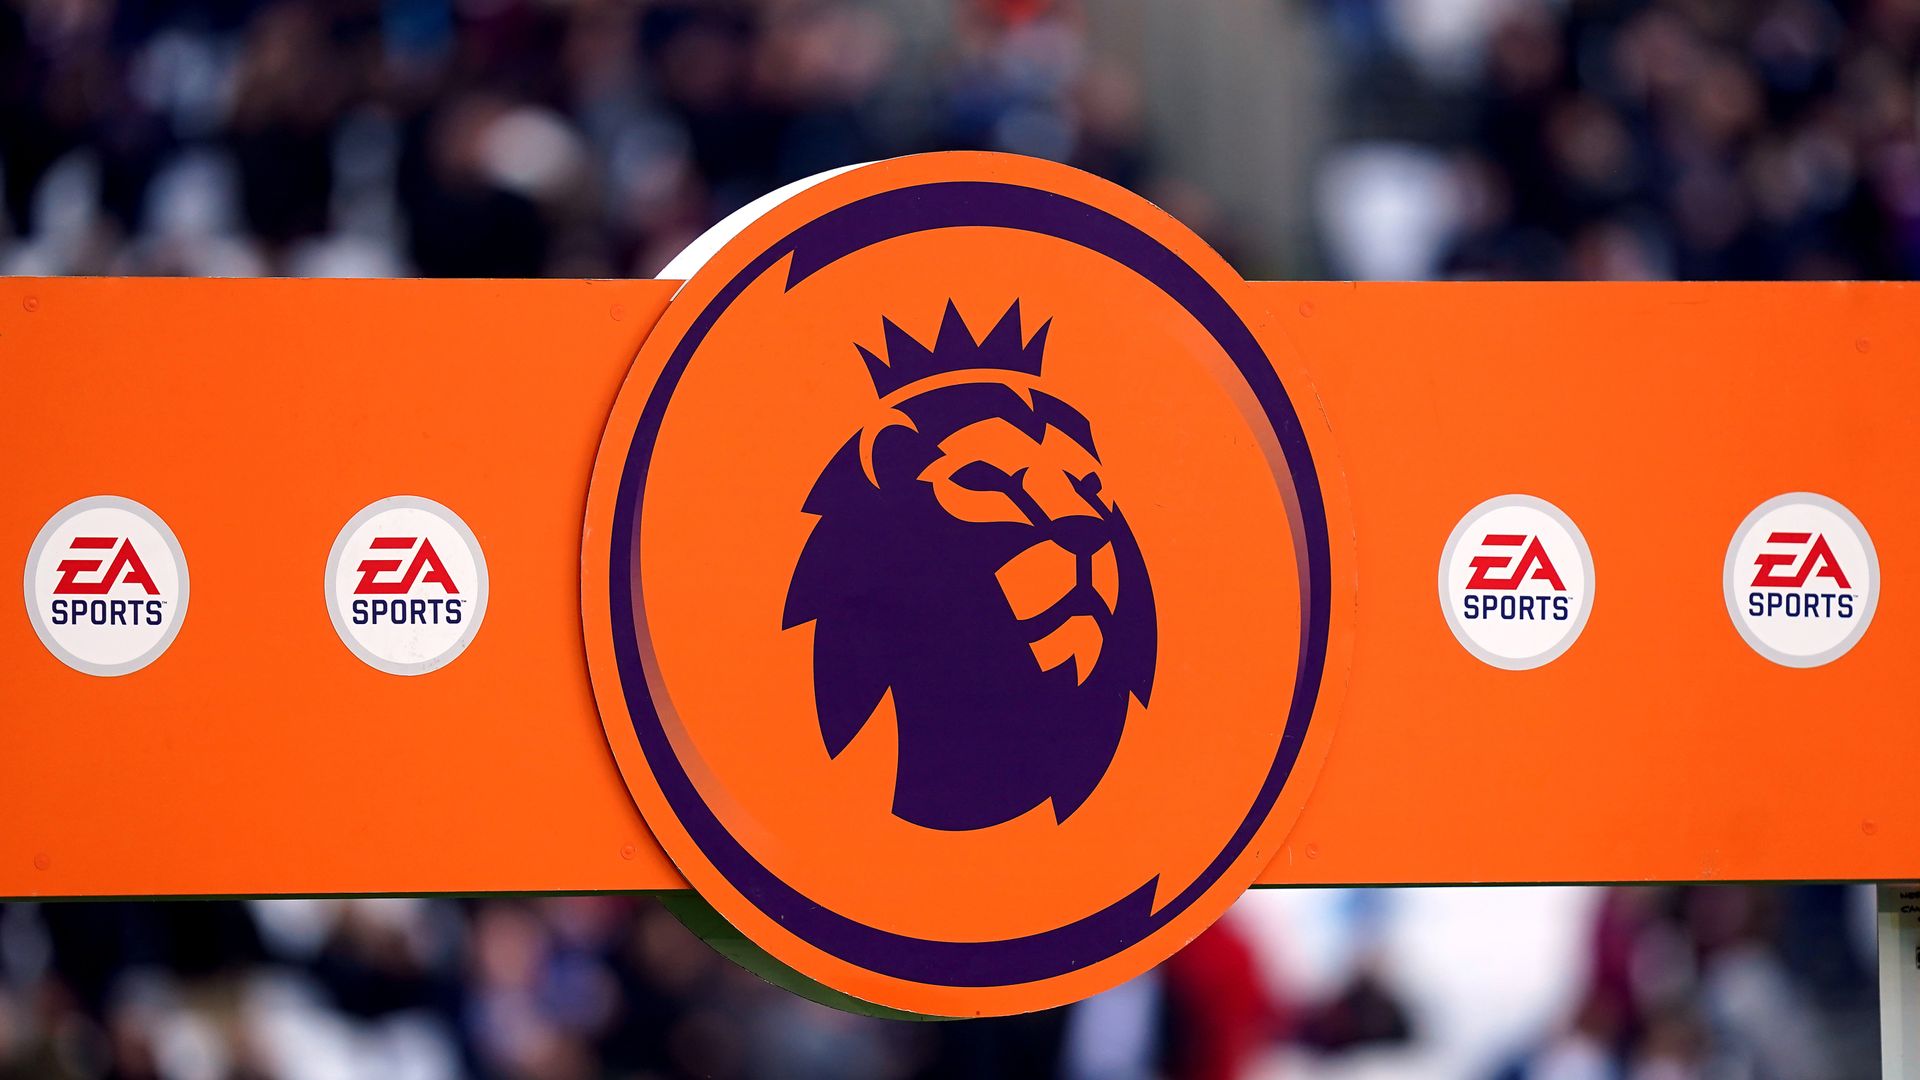 Premier League closes in £500m deal with video games maker EA Sports